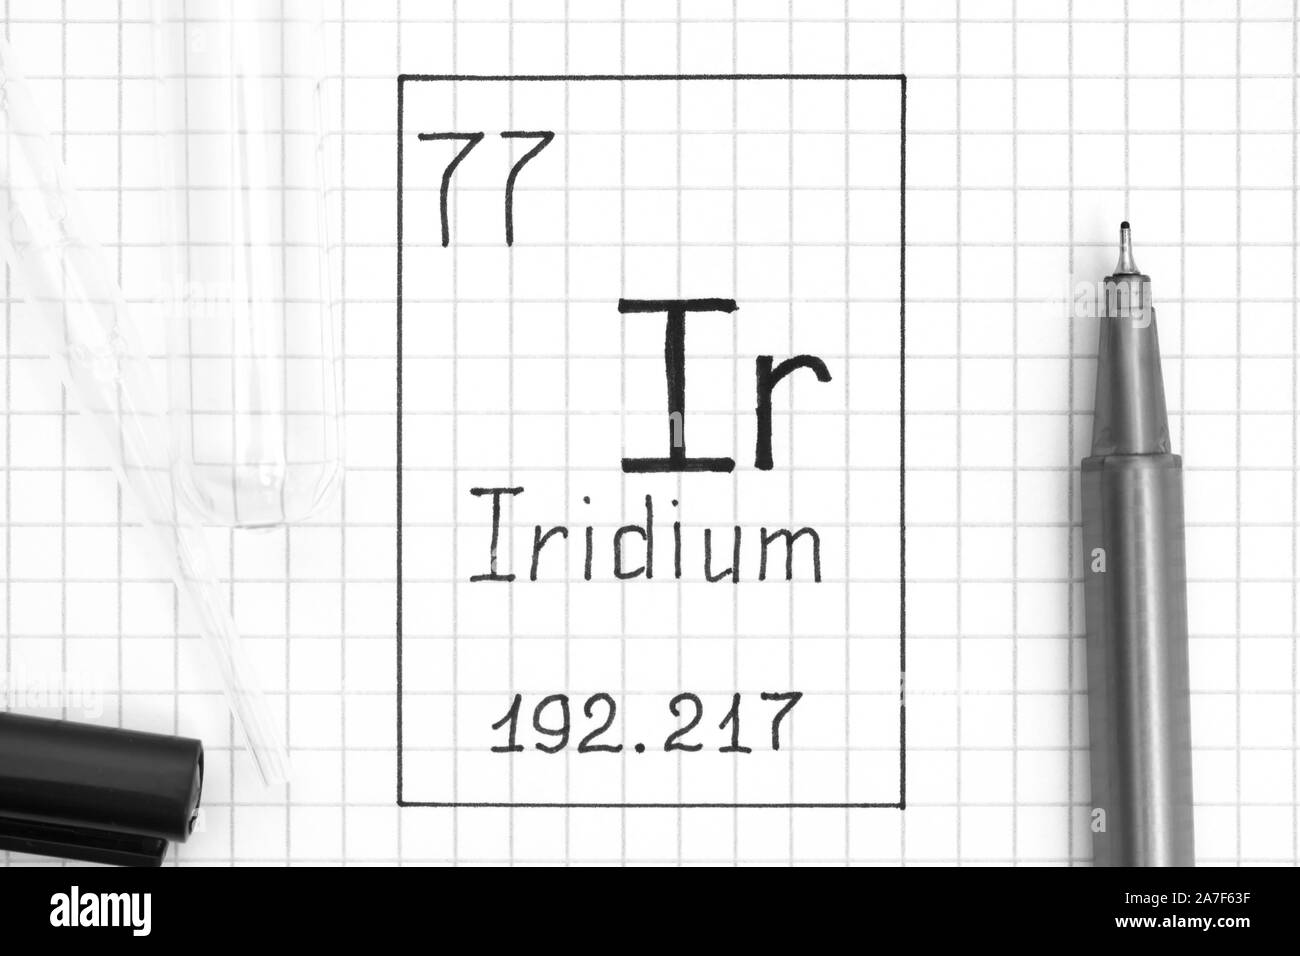 The Periodic table of elements. Handwriting chemical element Iridium Ir with black pen, test tube and pipette. Close-up. Stock Photo